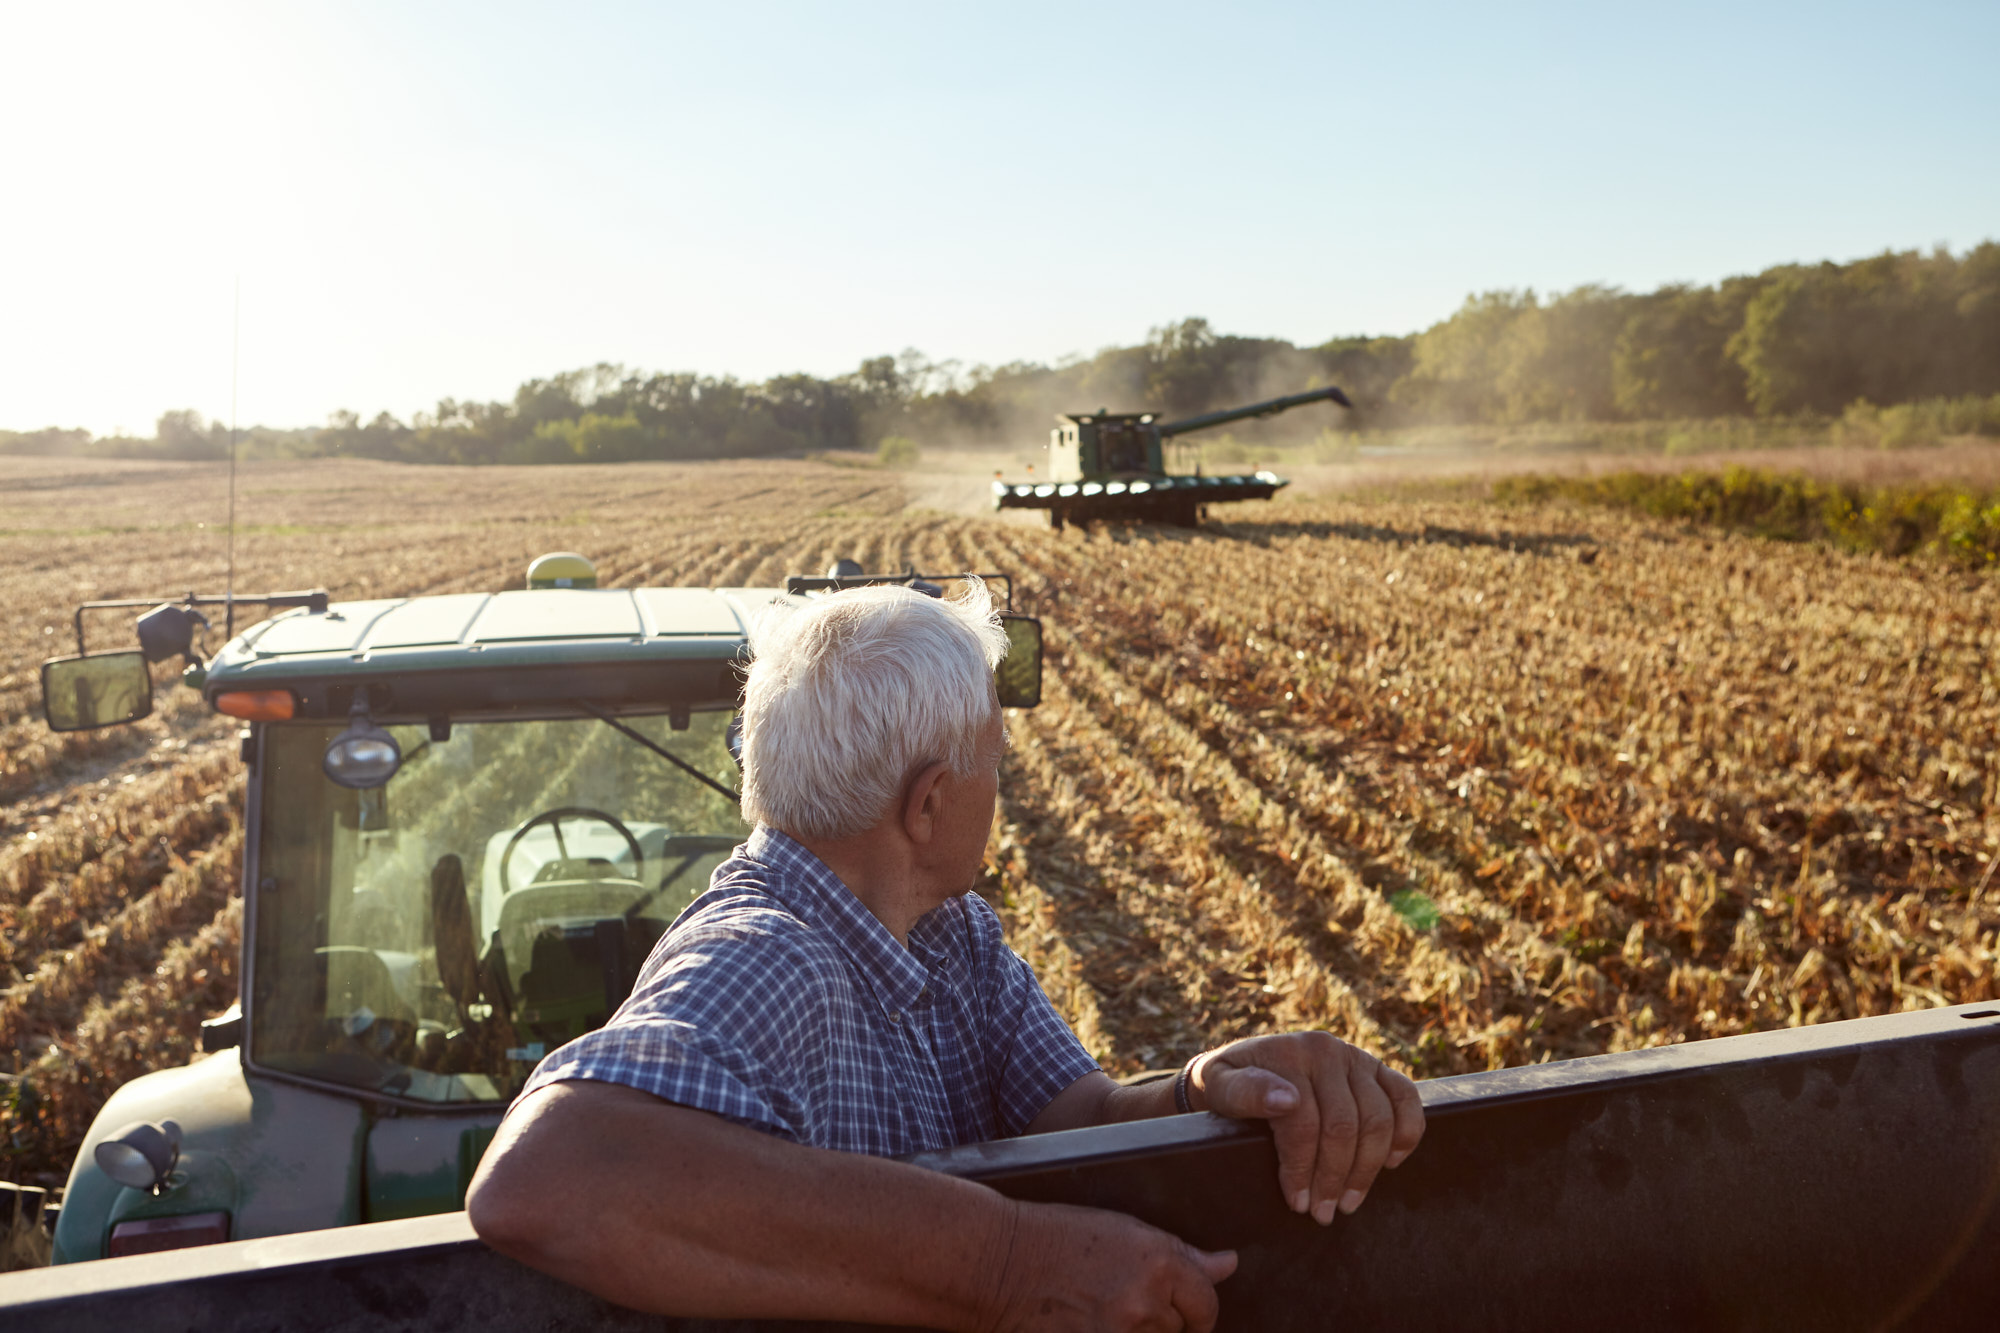 Farmer and Field | Agriculture Lifestyle Photography